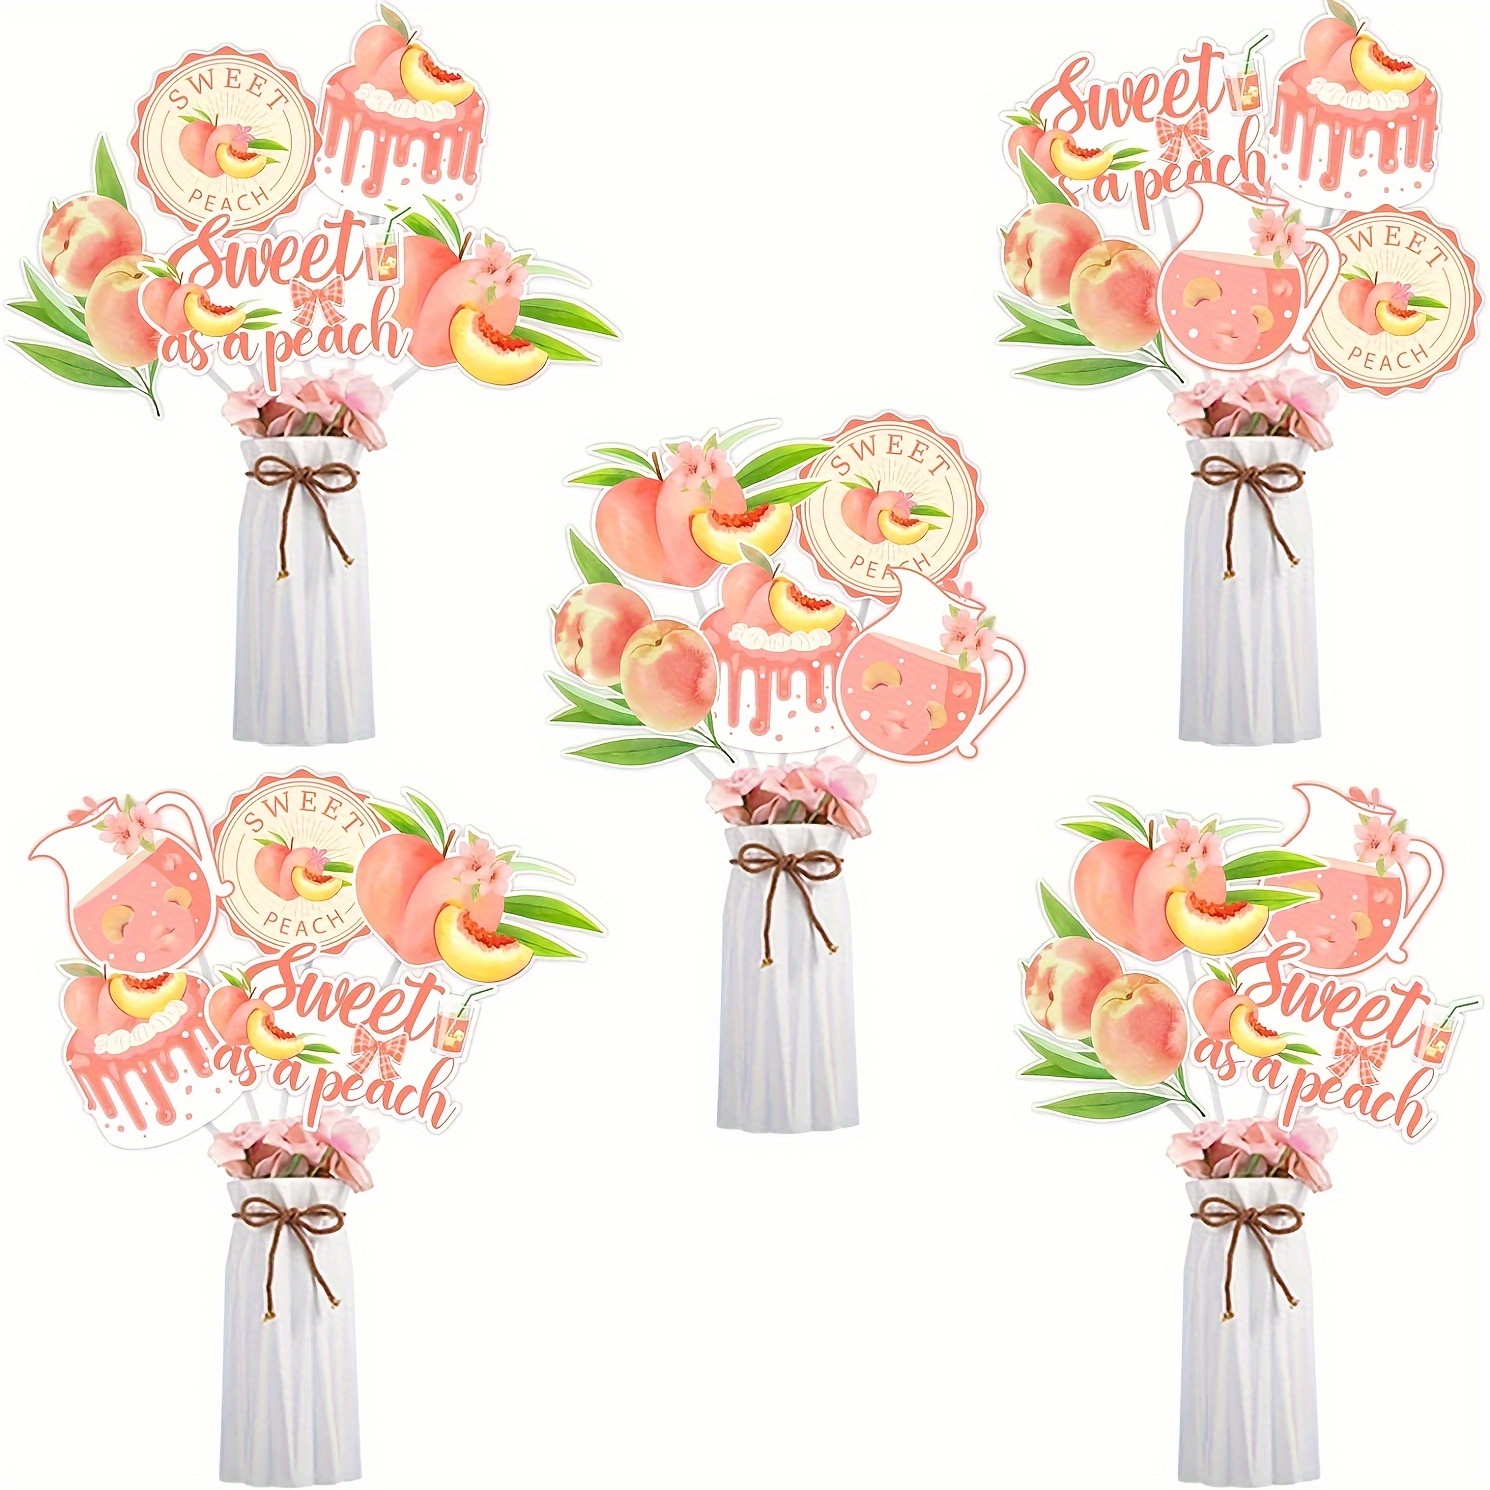 One Sweet Peach Birthday Decorations, Peach 1st Birthday Decorations for  Girls - One Sweet Peach Backdrop One Highchair Banner Cake Topper Number 1  Orange Peach Pink Balloons for Sweet Peach 1st Bday 